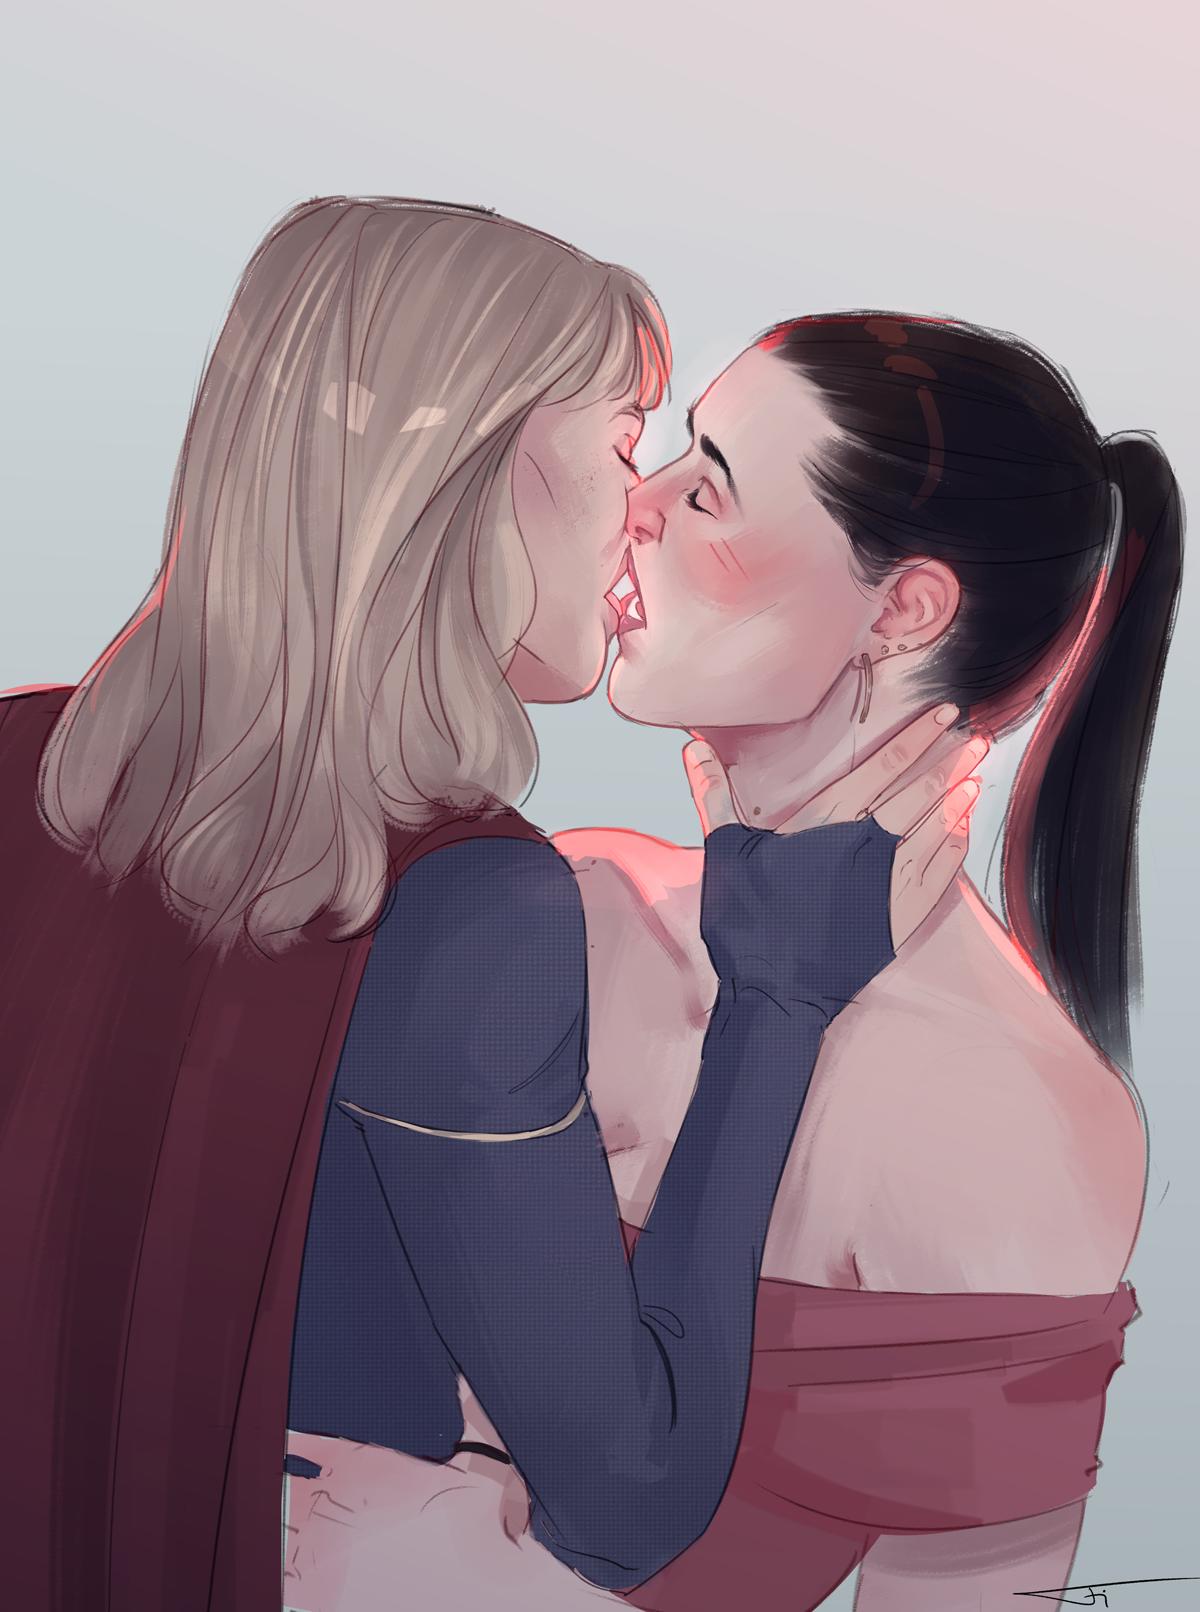 https://t.co/hZUMuMwe5s Neck freckle #supercorp.